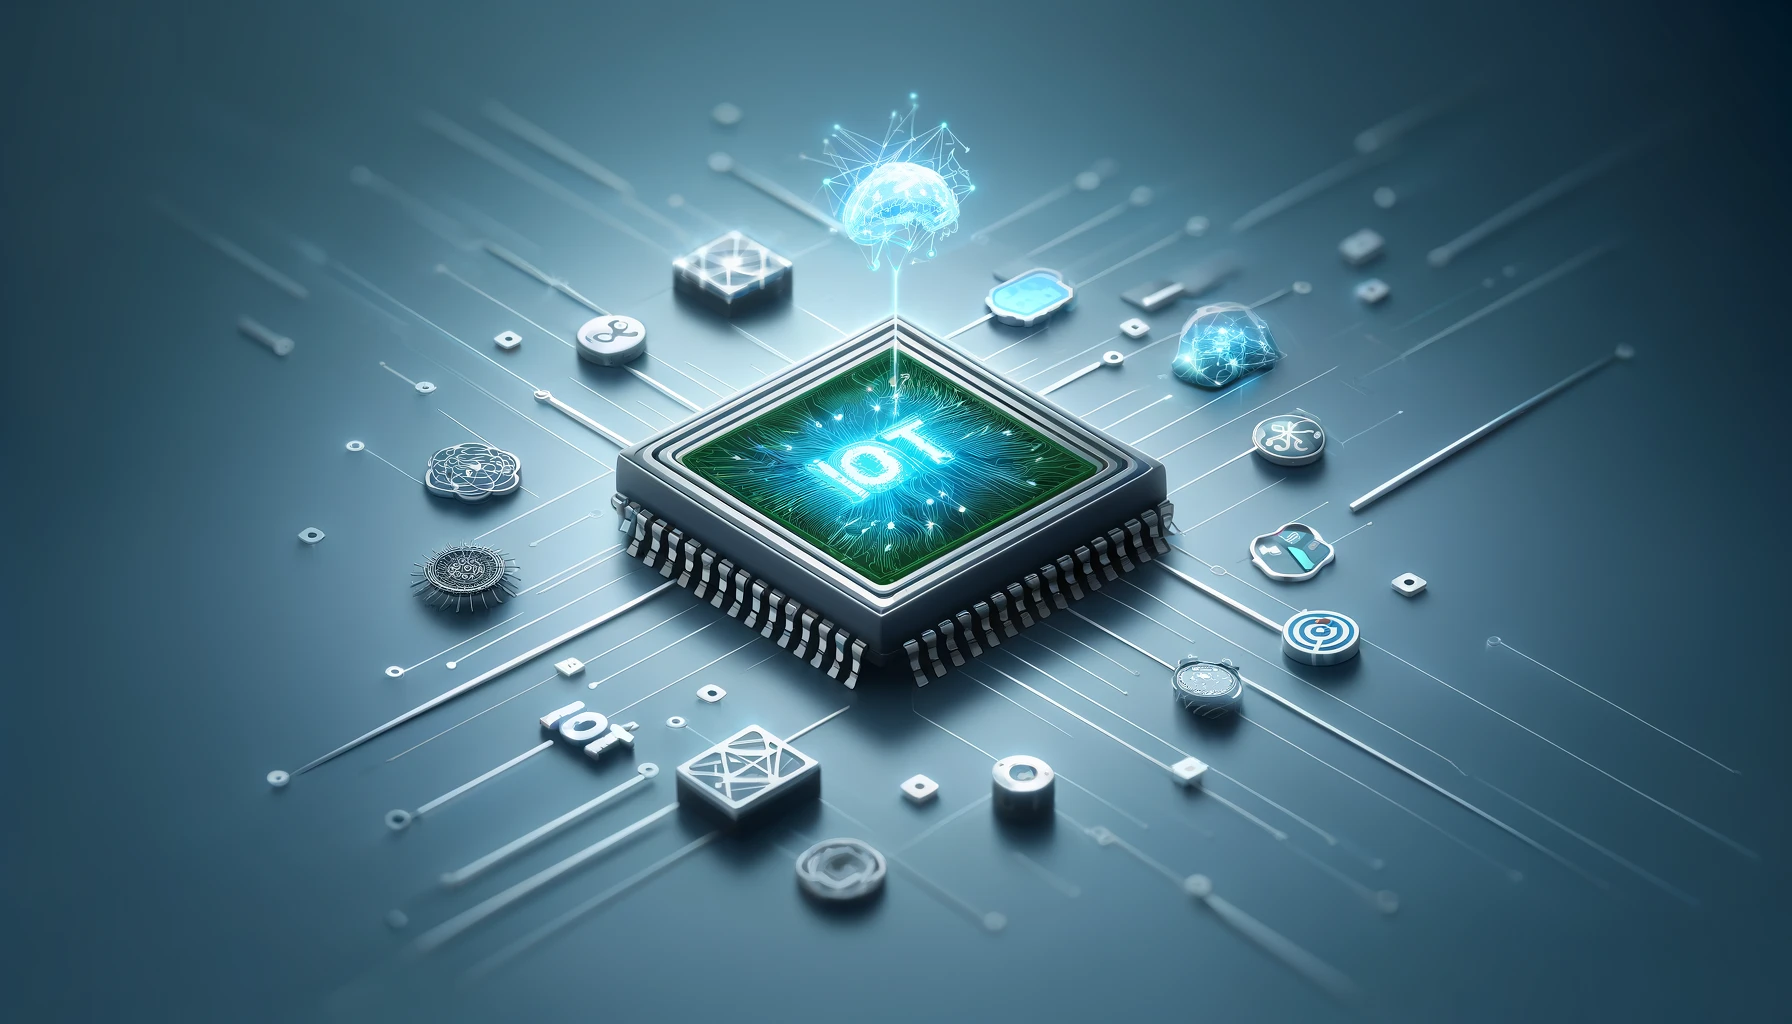 Arm integrates AI capabilities into IoT chips designed for edge computing applications.